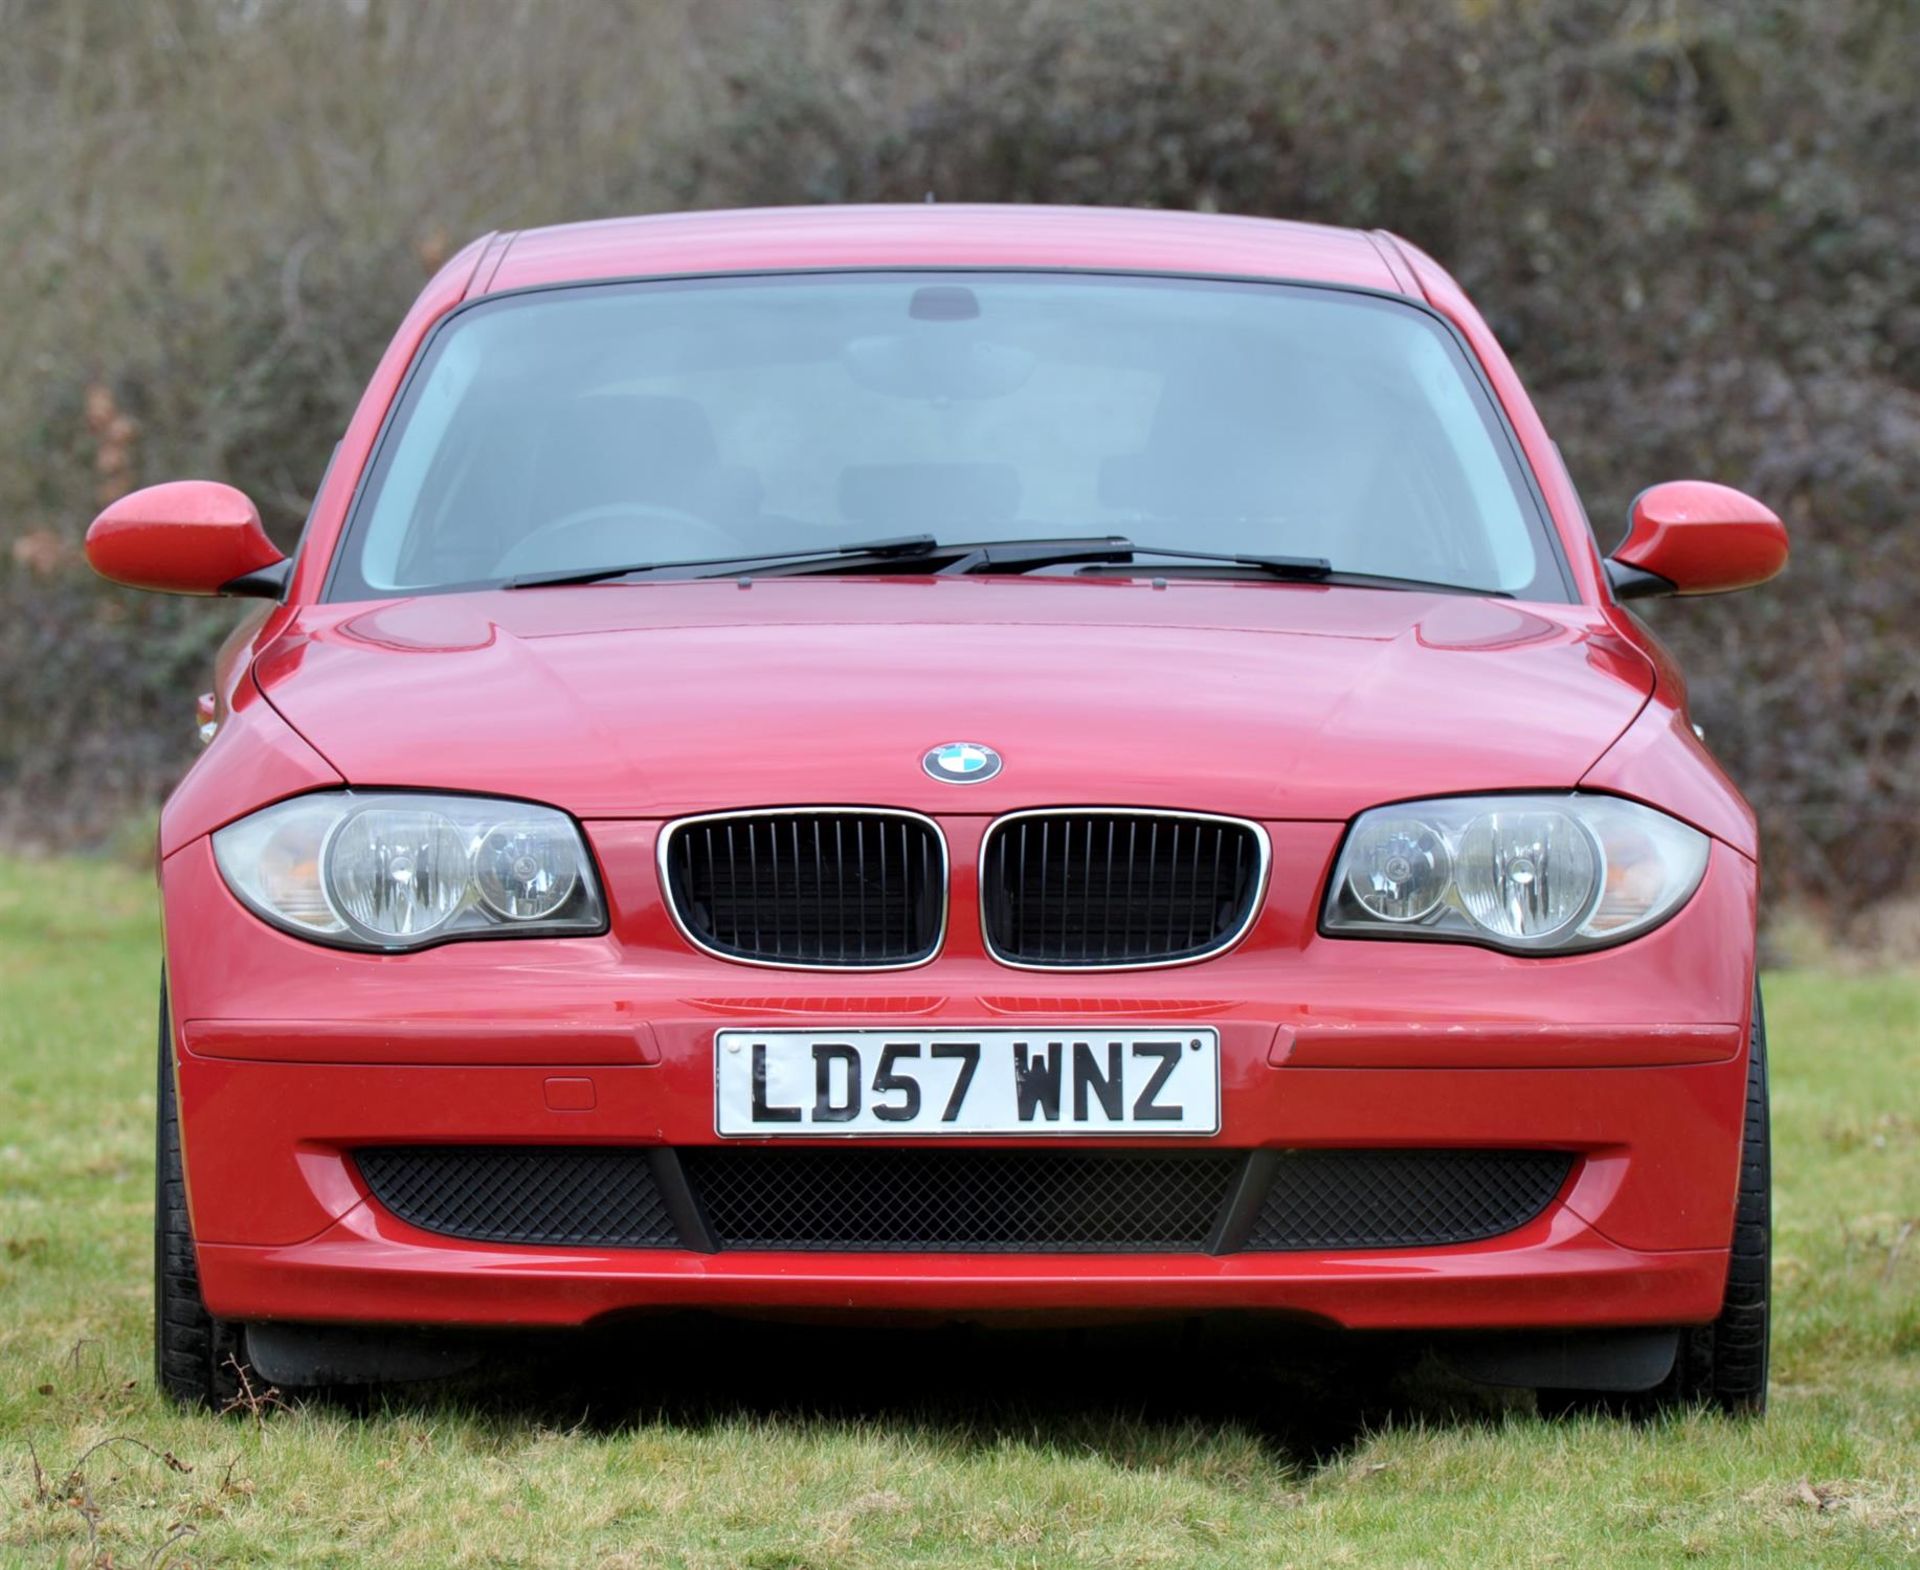 2007 BMW 116i 5 Door in red. Registration number LD57 WNZ - Economical and benefiting from the - Image 2 of 14